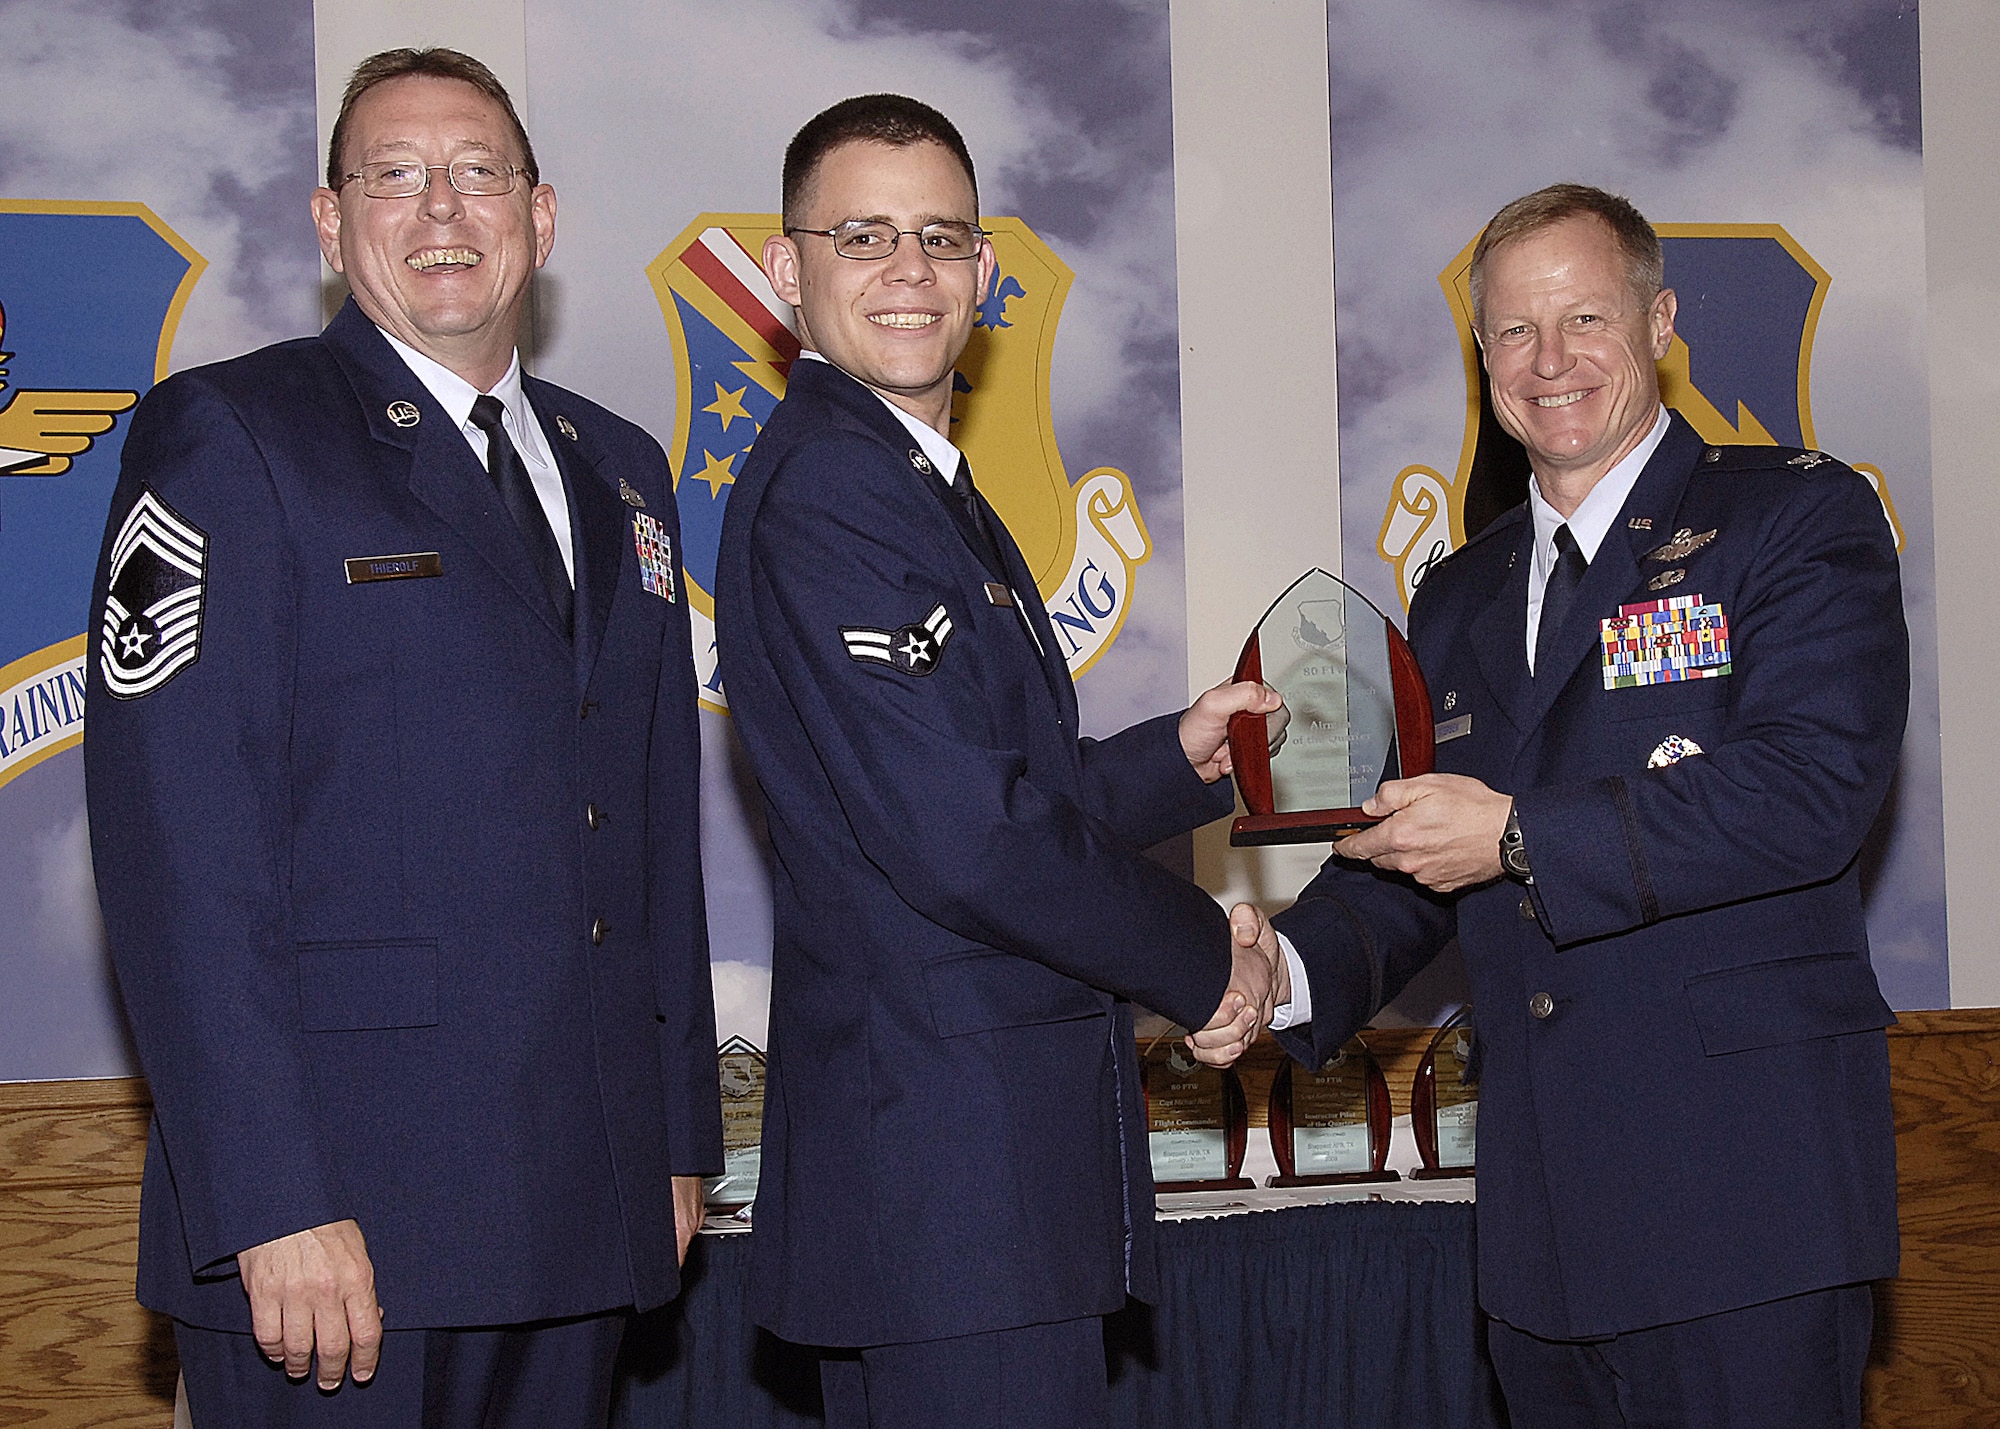 Airman 1st Class Nicholas Loerch, 80th Operations Support Squadron, accepts the Airman of the Quarter award from 80th Flying Training Wing Commander Col. David Petersen April 22 during the wing's quarterly award ceremony. Airman Loerch displayed the knowledge and skill of a veteran air traffic controller when he safely guided an aircraft experiencing radio problems to the ground. The air traffic controller was also key in safely controlling five commerical airliners diverted by recent storms. Also pictured is 80th FTW Superintendent Chief Master Sgt. Norman Theirolf. (U.S. Air Force photos/Harry Tonemah)